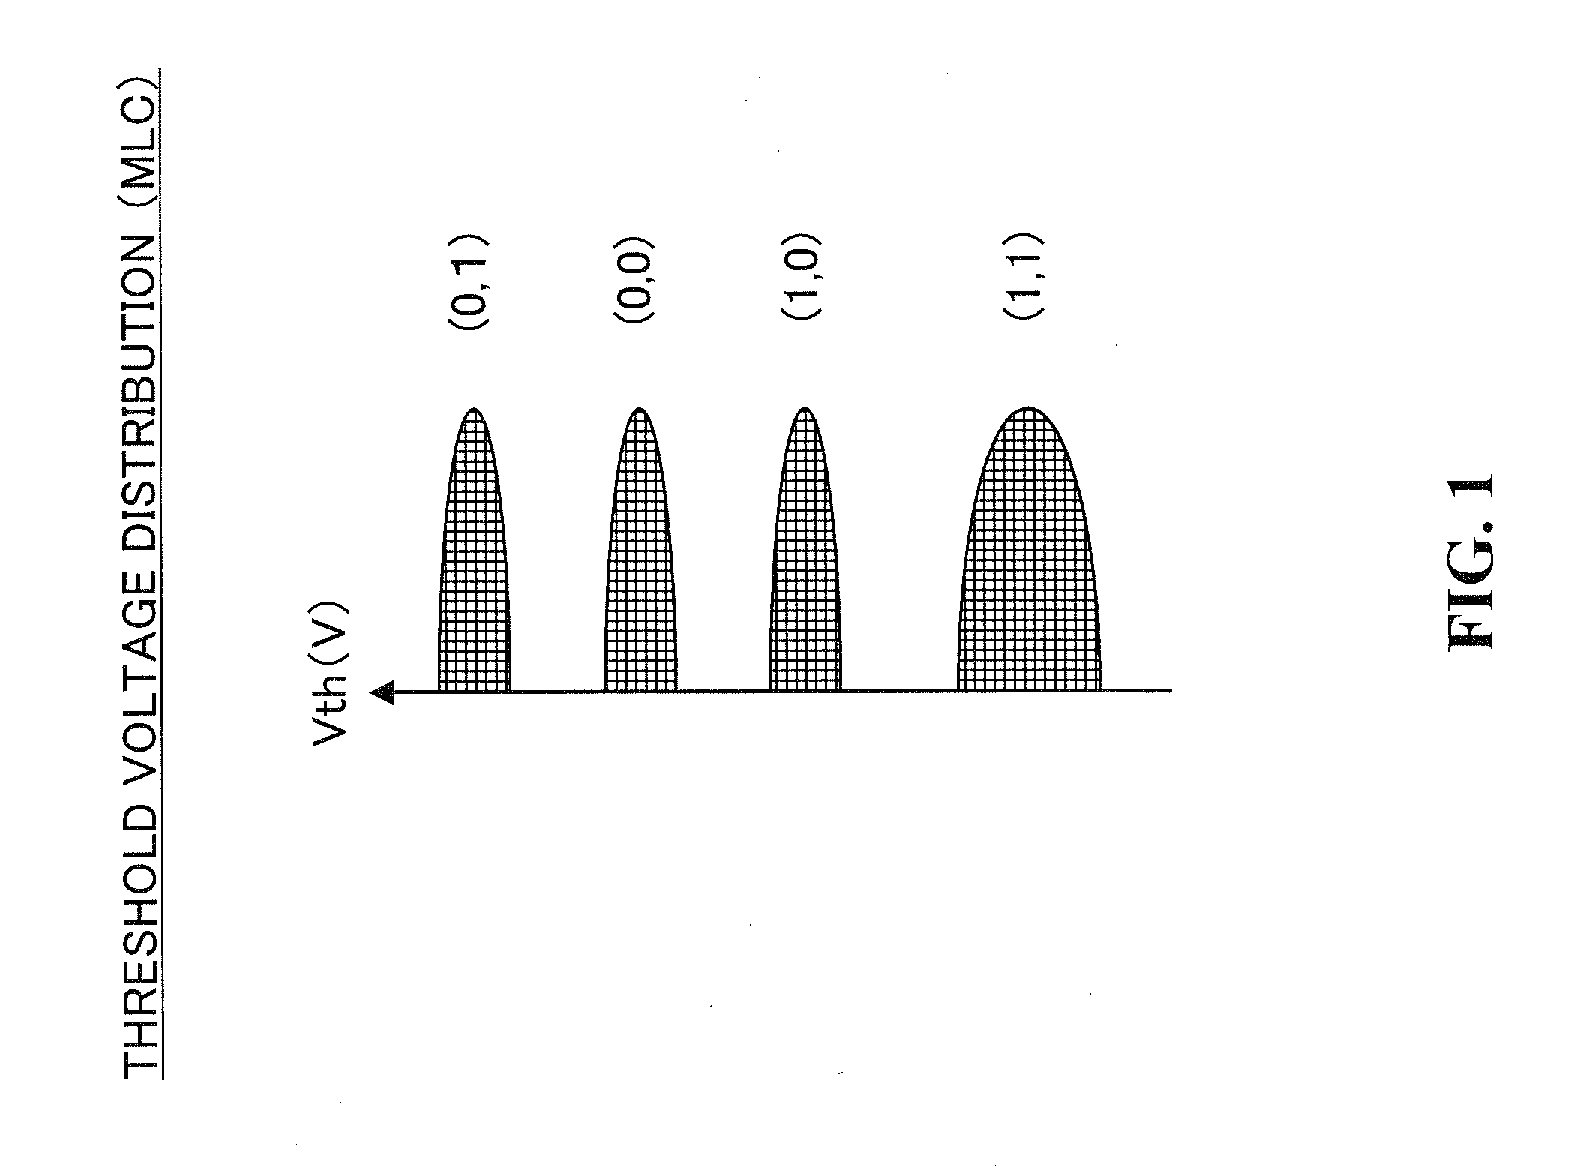 Memory controller and storage device